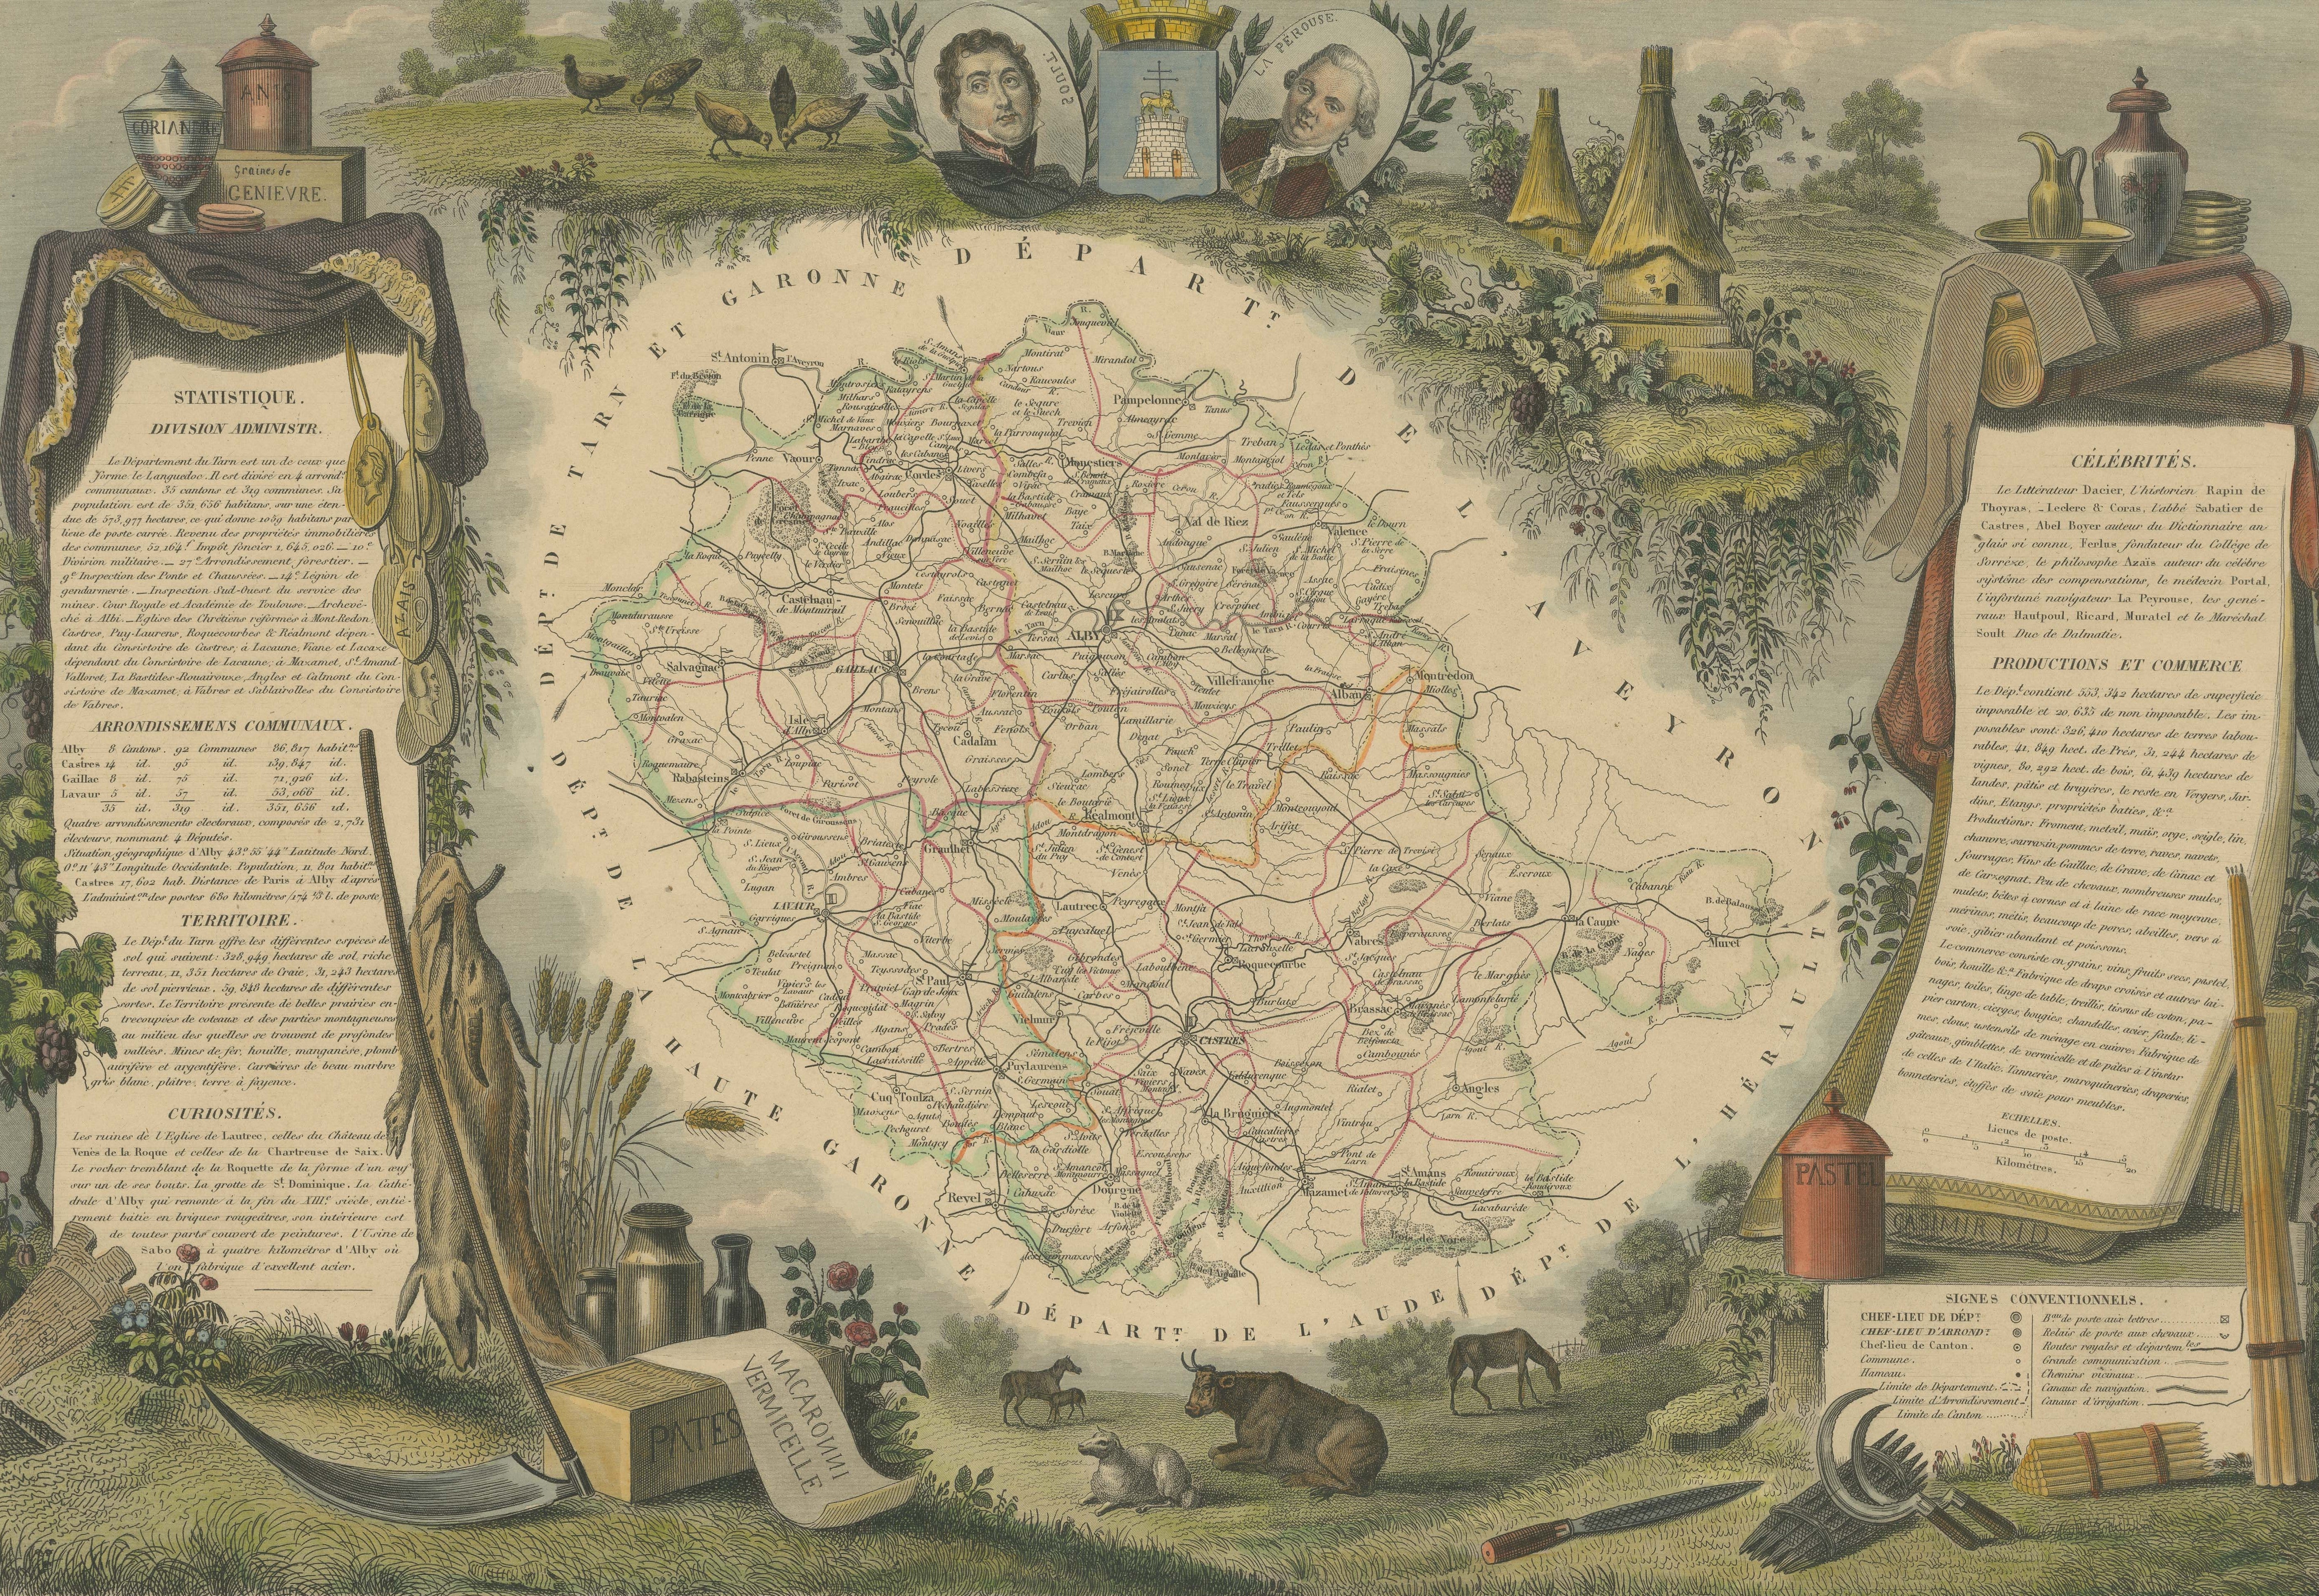 Antique map titled 'Dépt Du Tarn'. Map of the French department of Du tarn, France. 

This area produces a variety of traditional wines, including Cahors, Mauzac, Loin de l’Oeil and Ondenc for the white varieties and Braucol, Duras and Prunelart